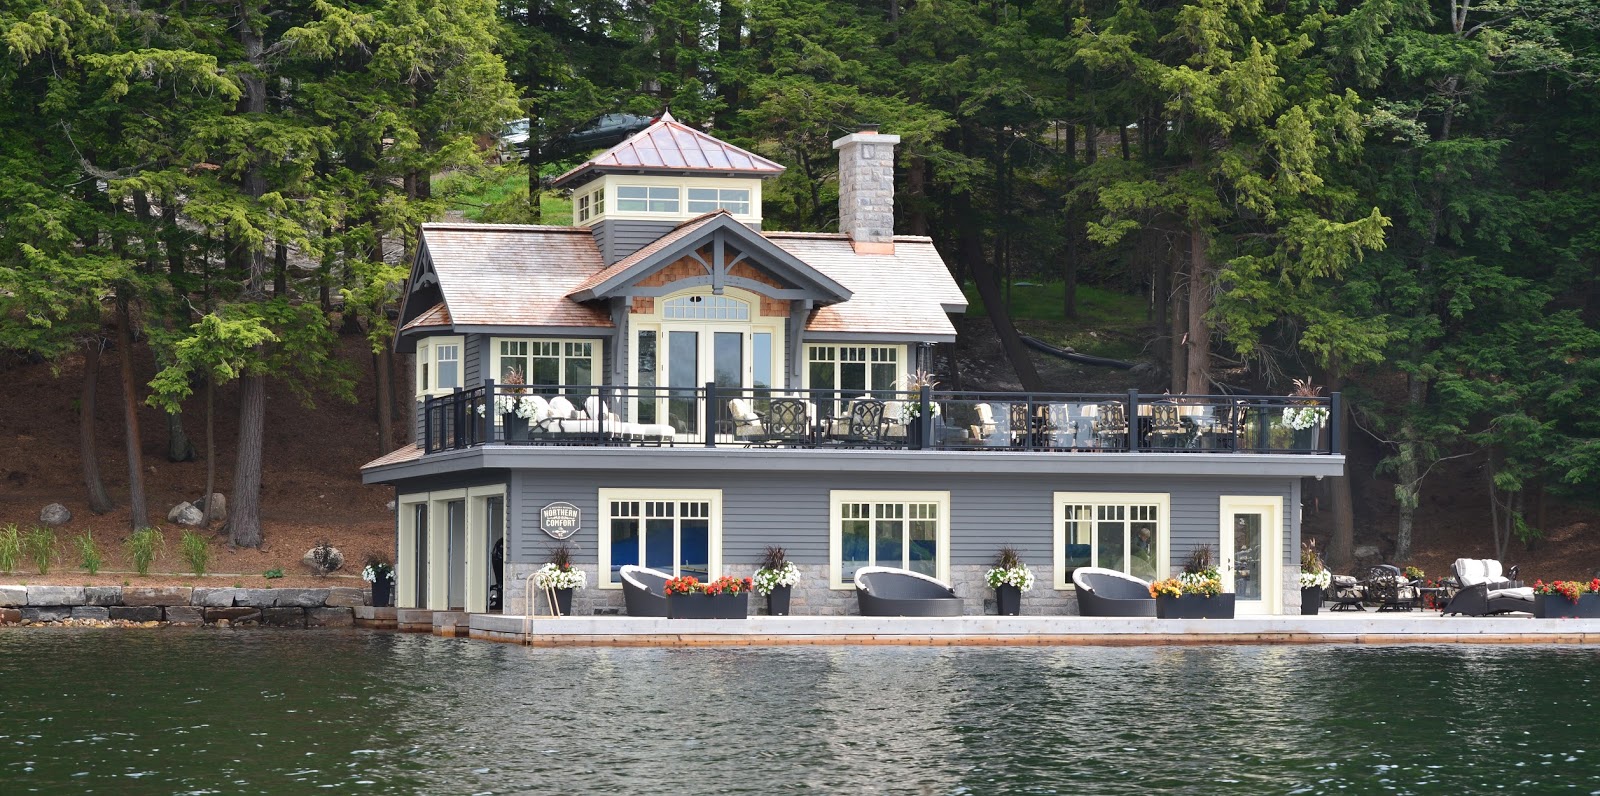 Just things and thoughts: Muskoka Boathouses and Cottages